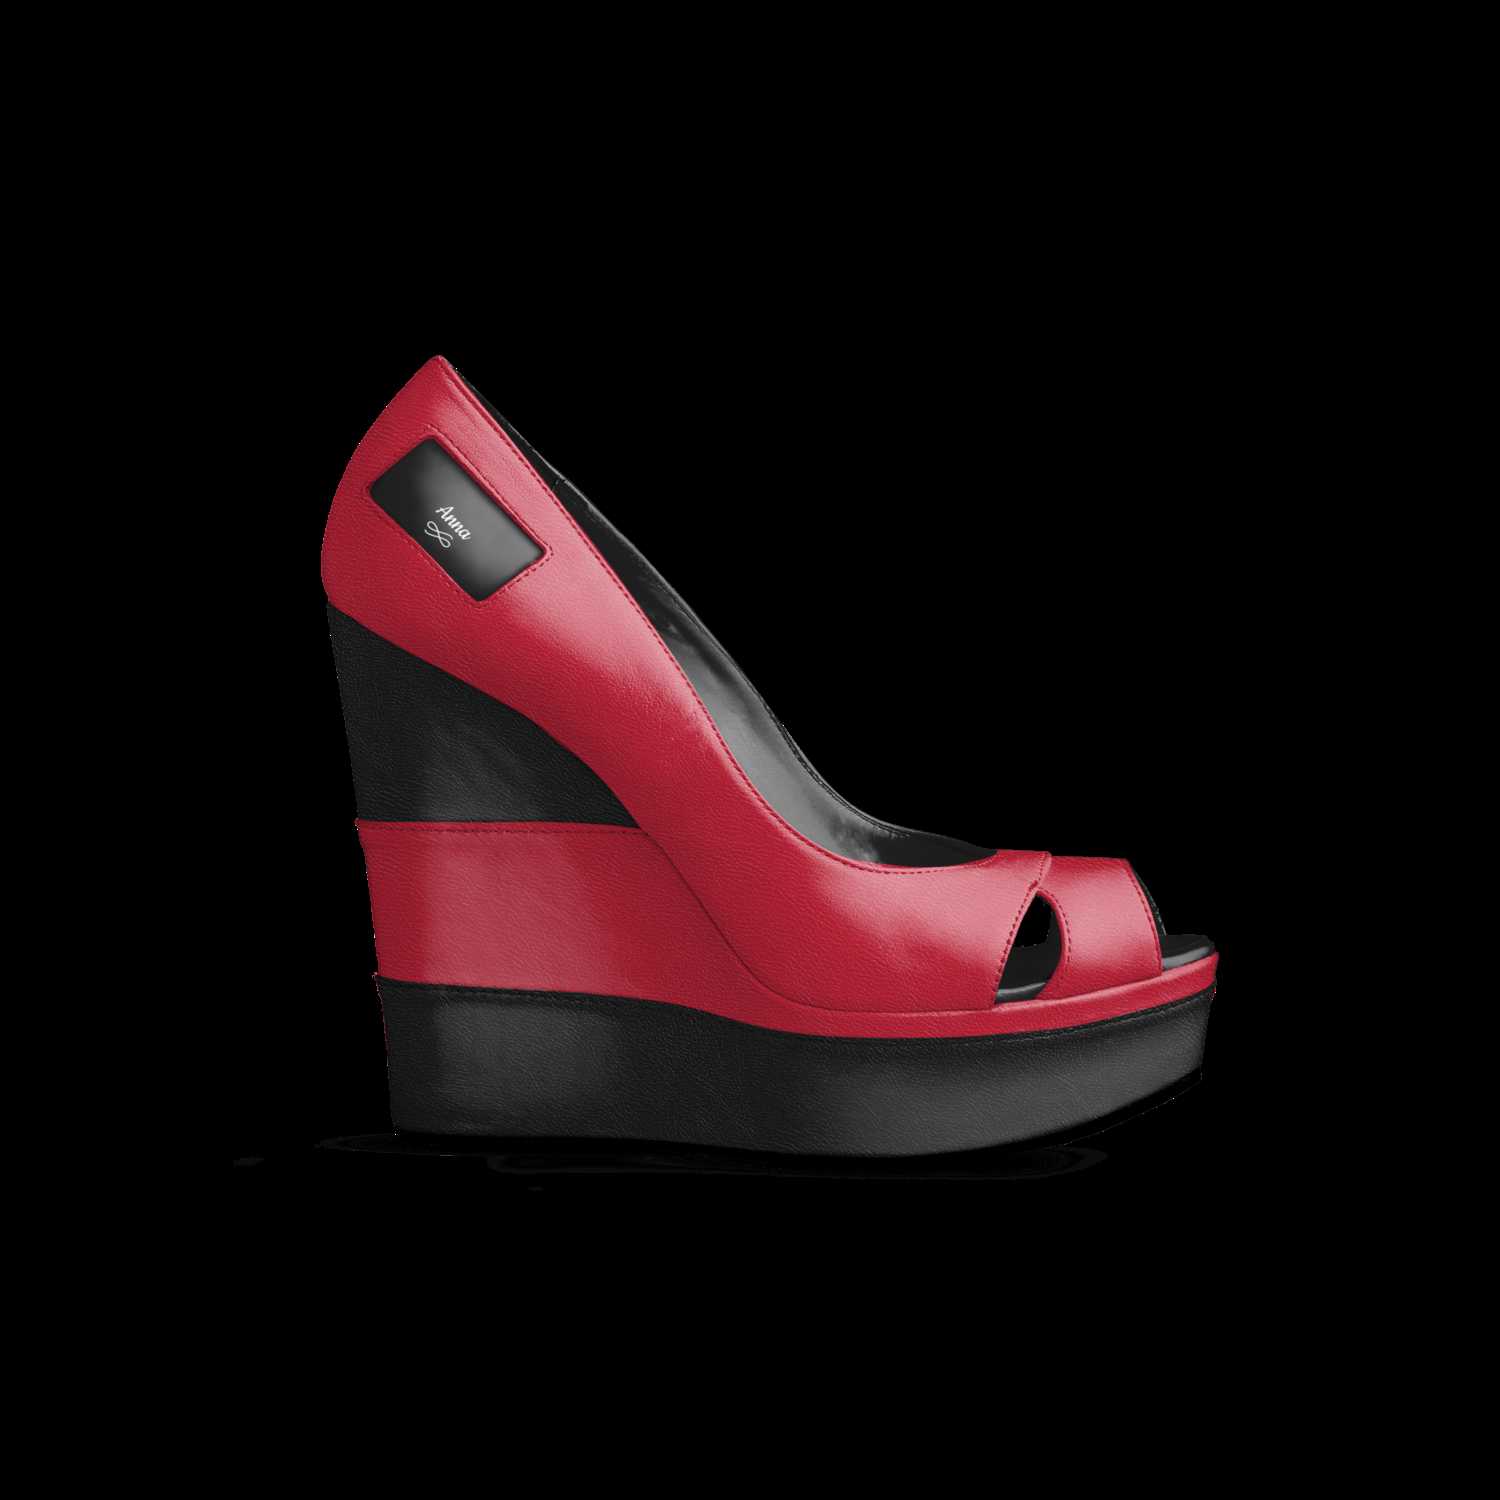 wedge shoes at edgars